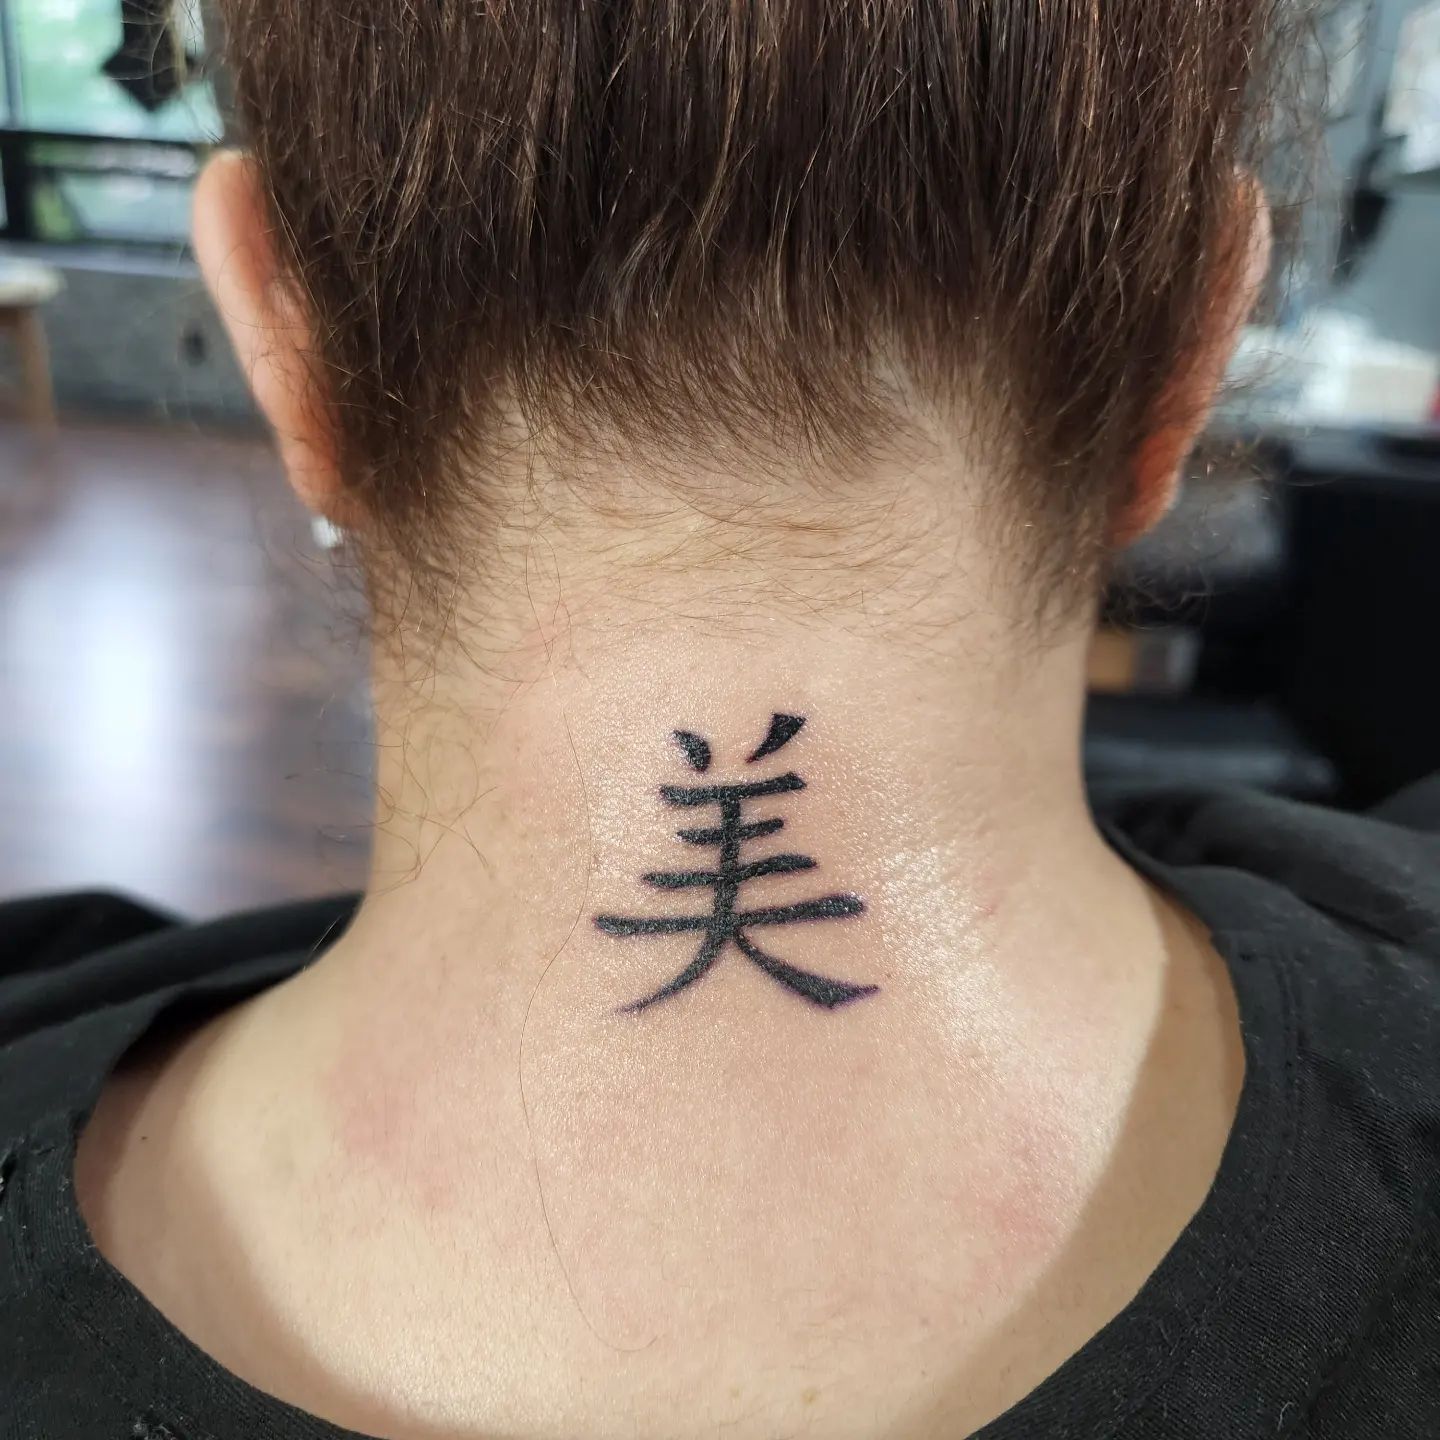 15 Most Popular Chinese Tattoo Designs and Patterns